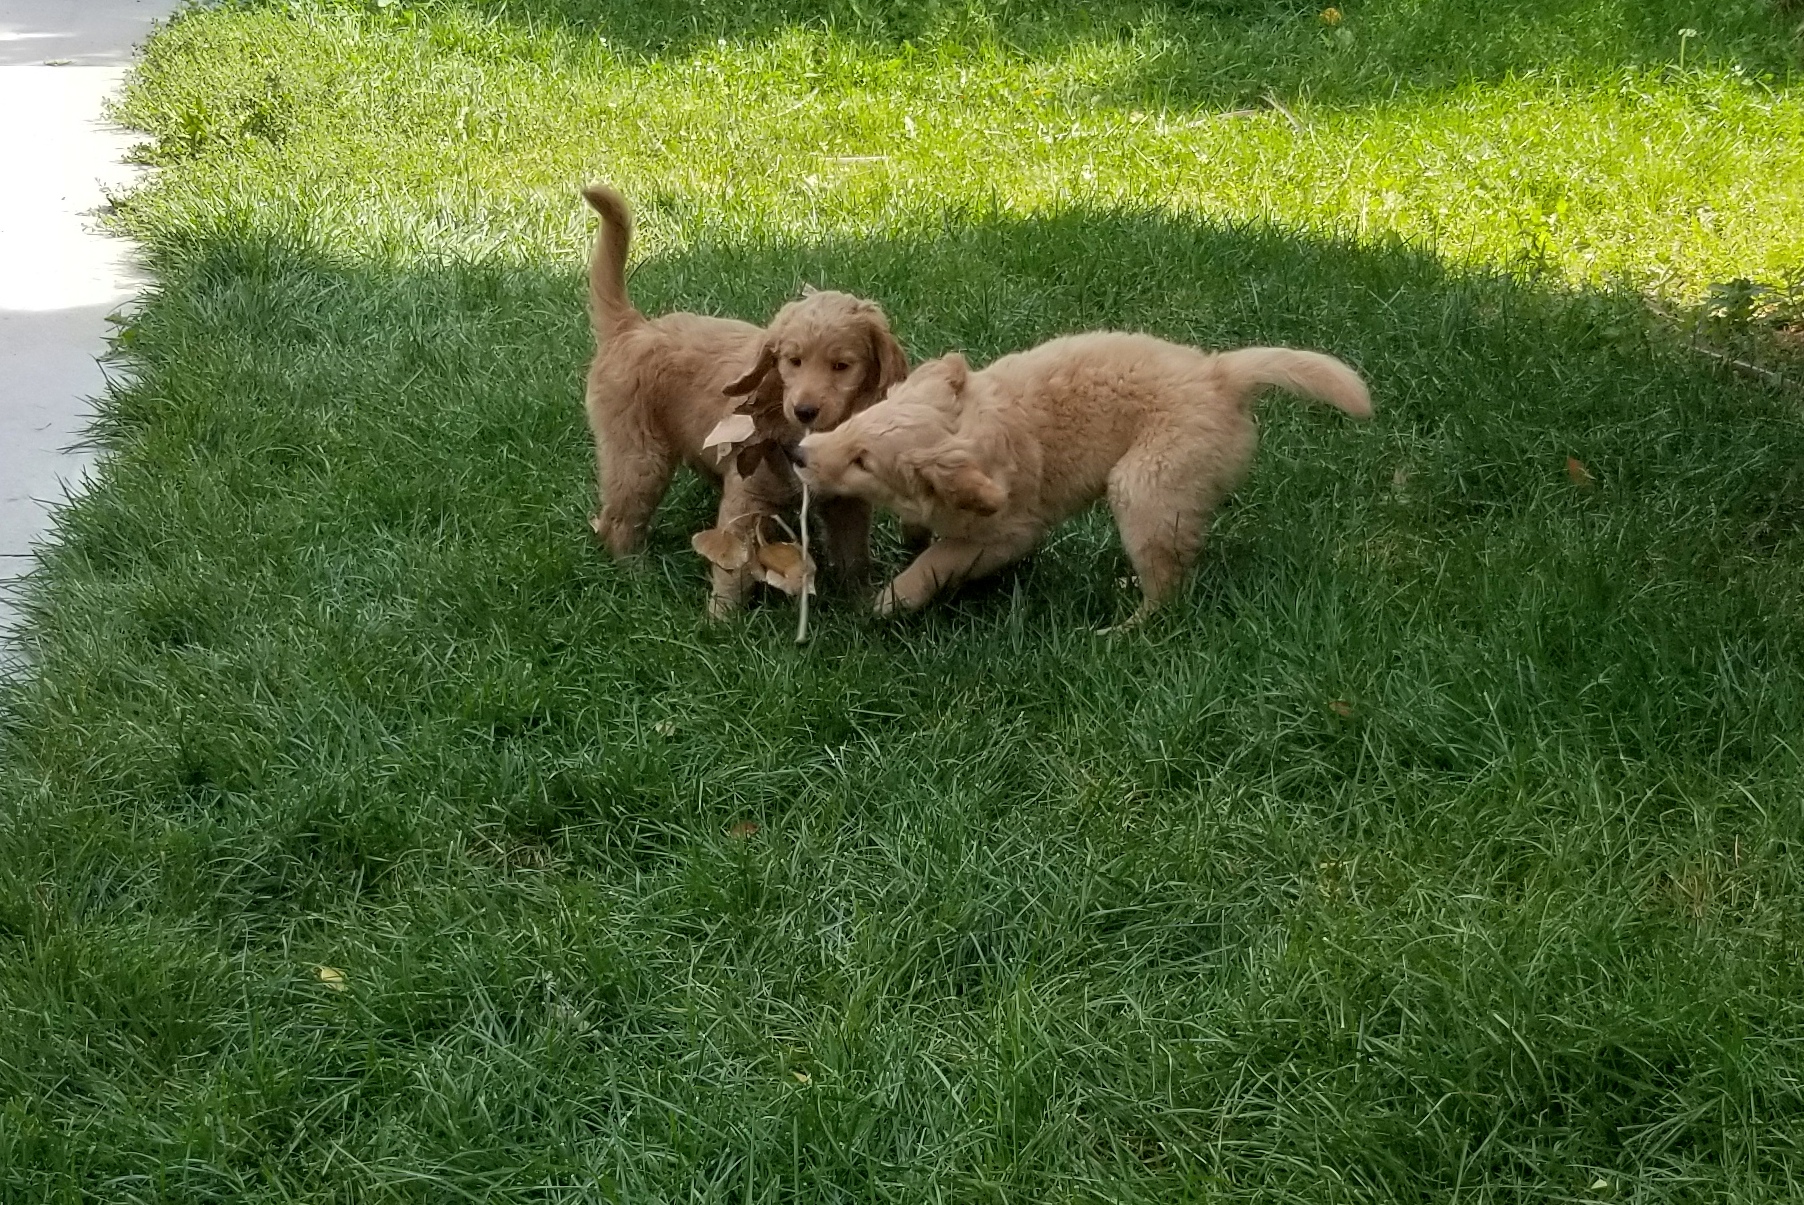 Cooper and Gus